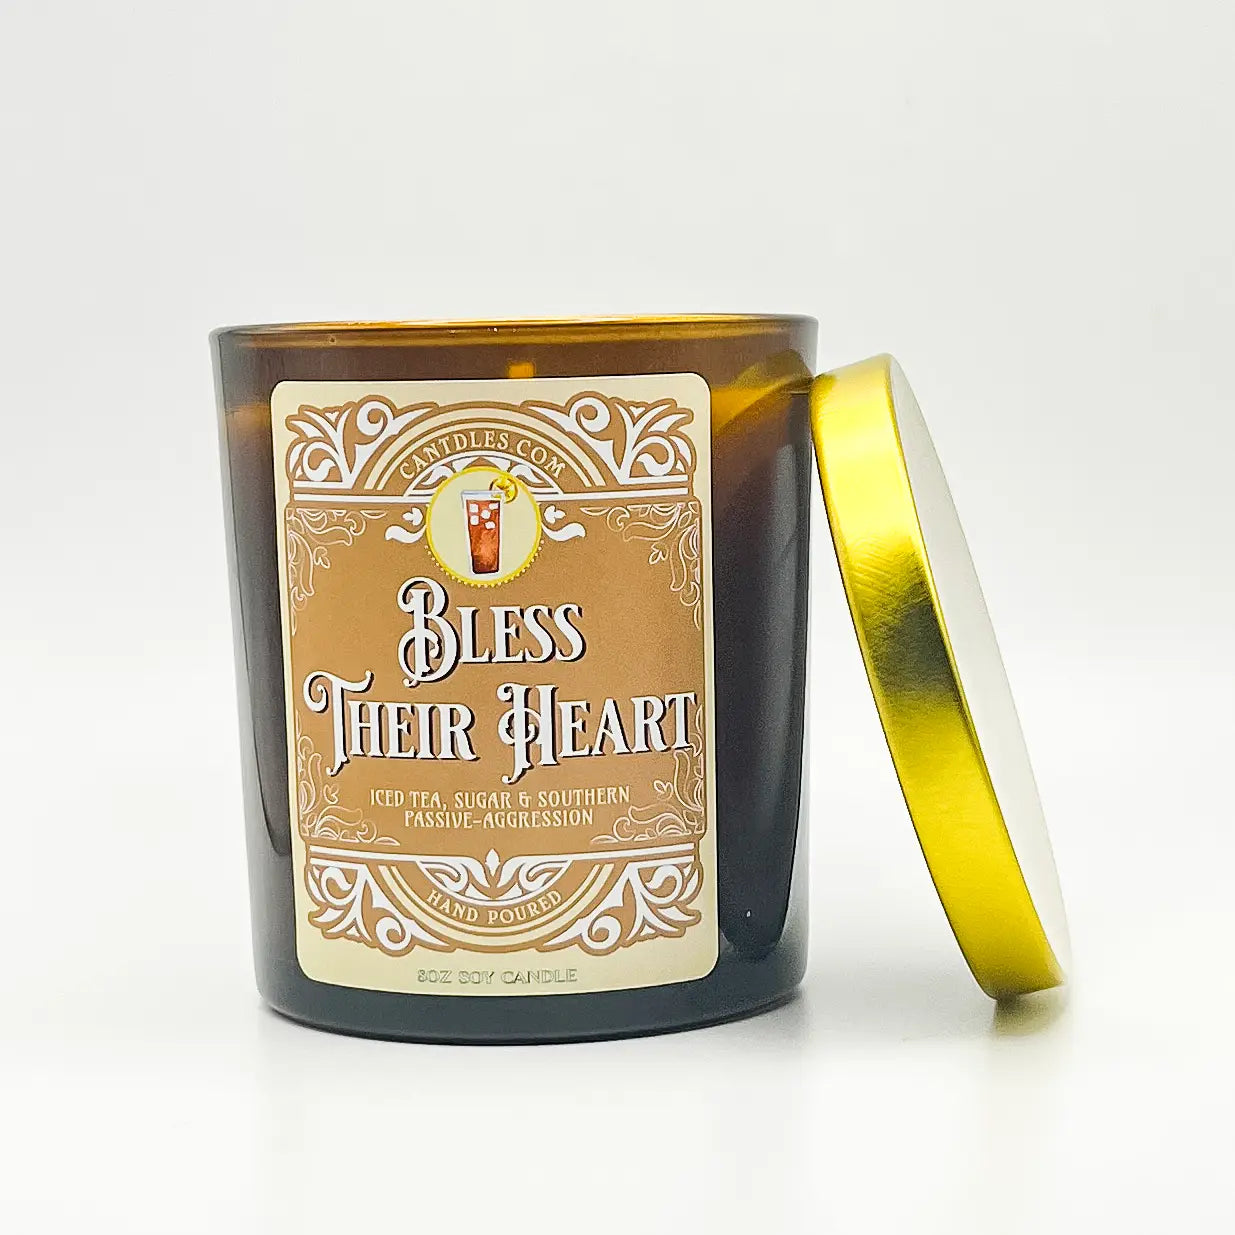 "Bless Their Heart" Candle